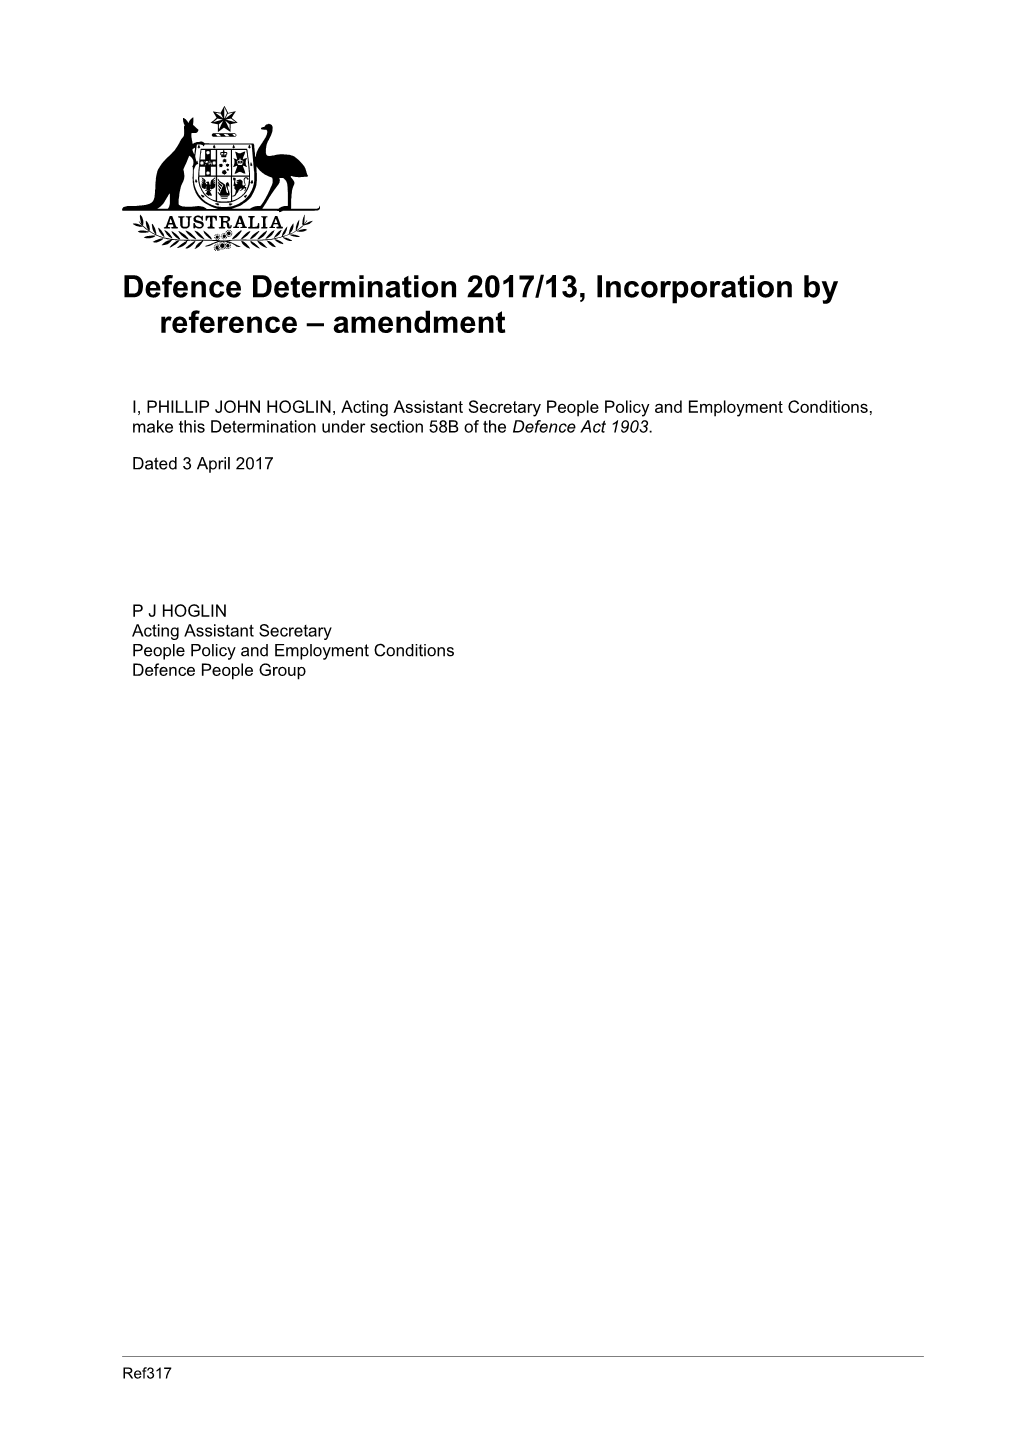 Defence Determination 2017/13, Incorporation by Reference Amendment